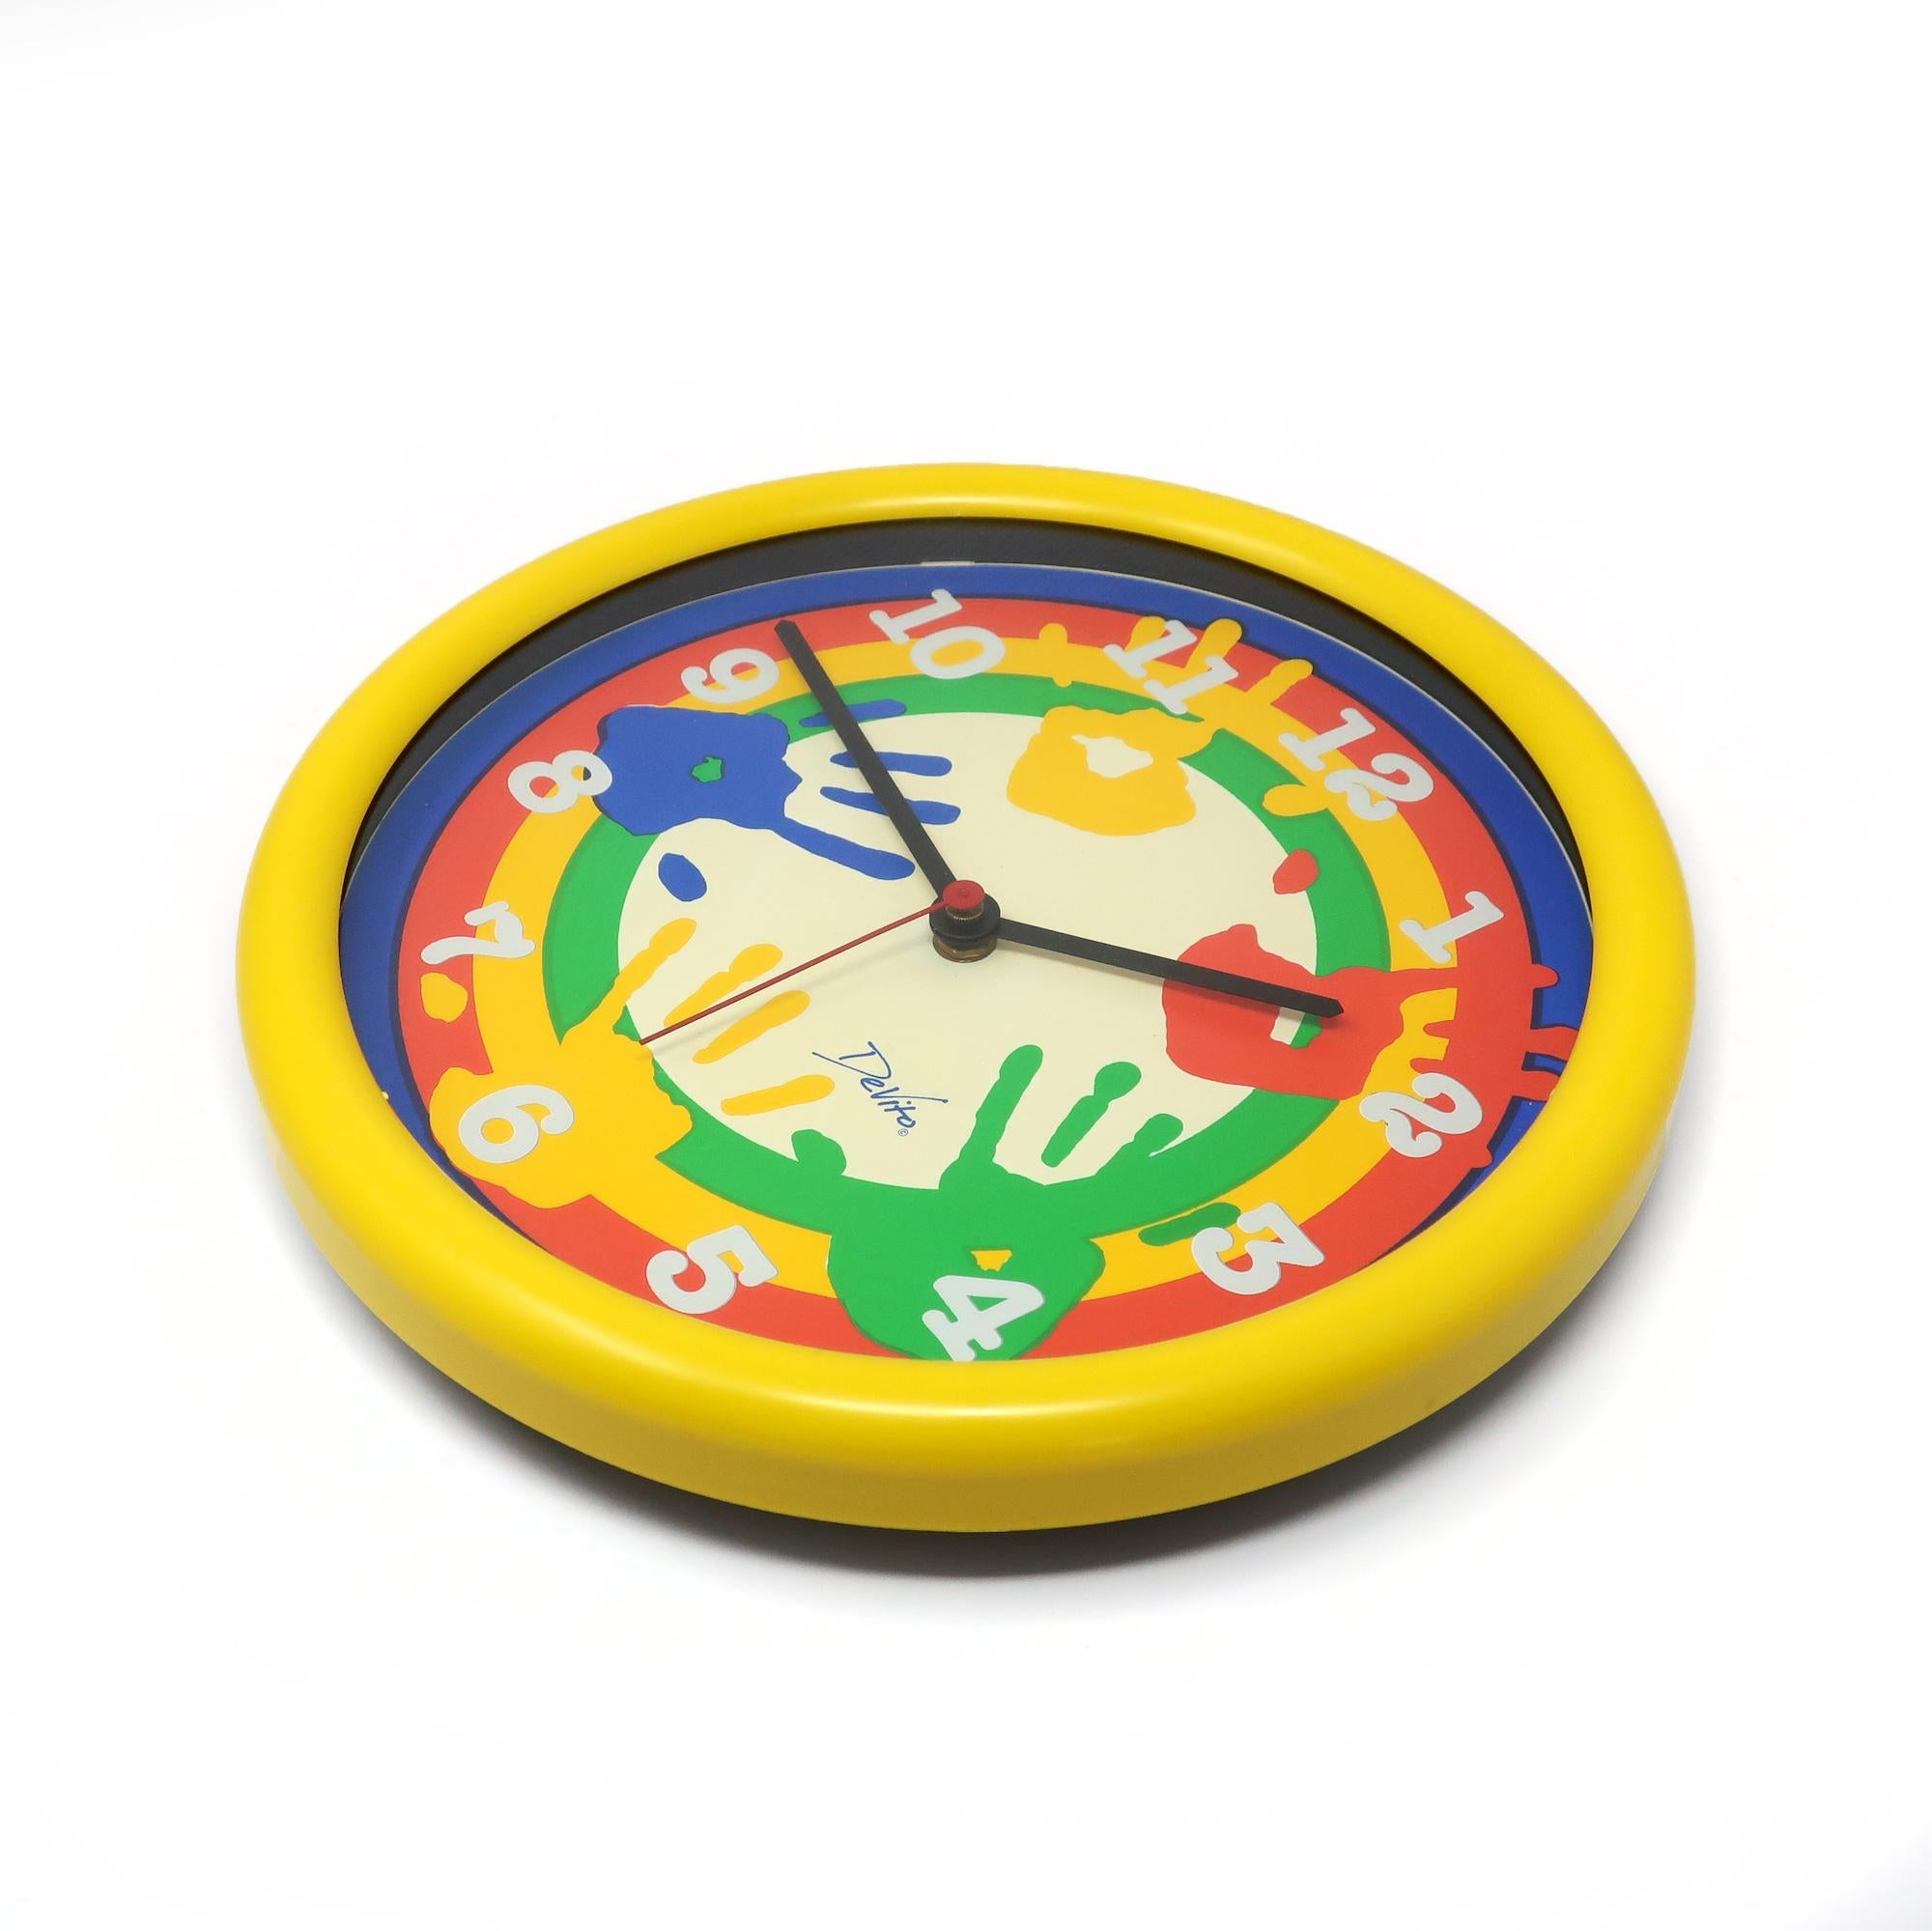 A fun postmodern colored wall clock from the 1980s by Devito.  It has a yellow plastic case, blue, red, yellow, white and green face with multicolored handprints, and black and red clock hands.  Brings a lot of color to any room, whether it be a